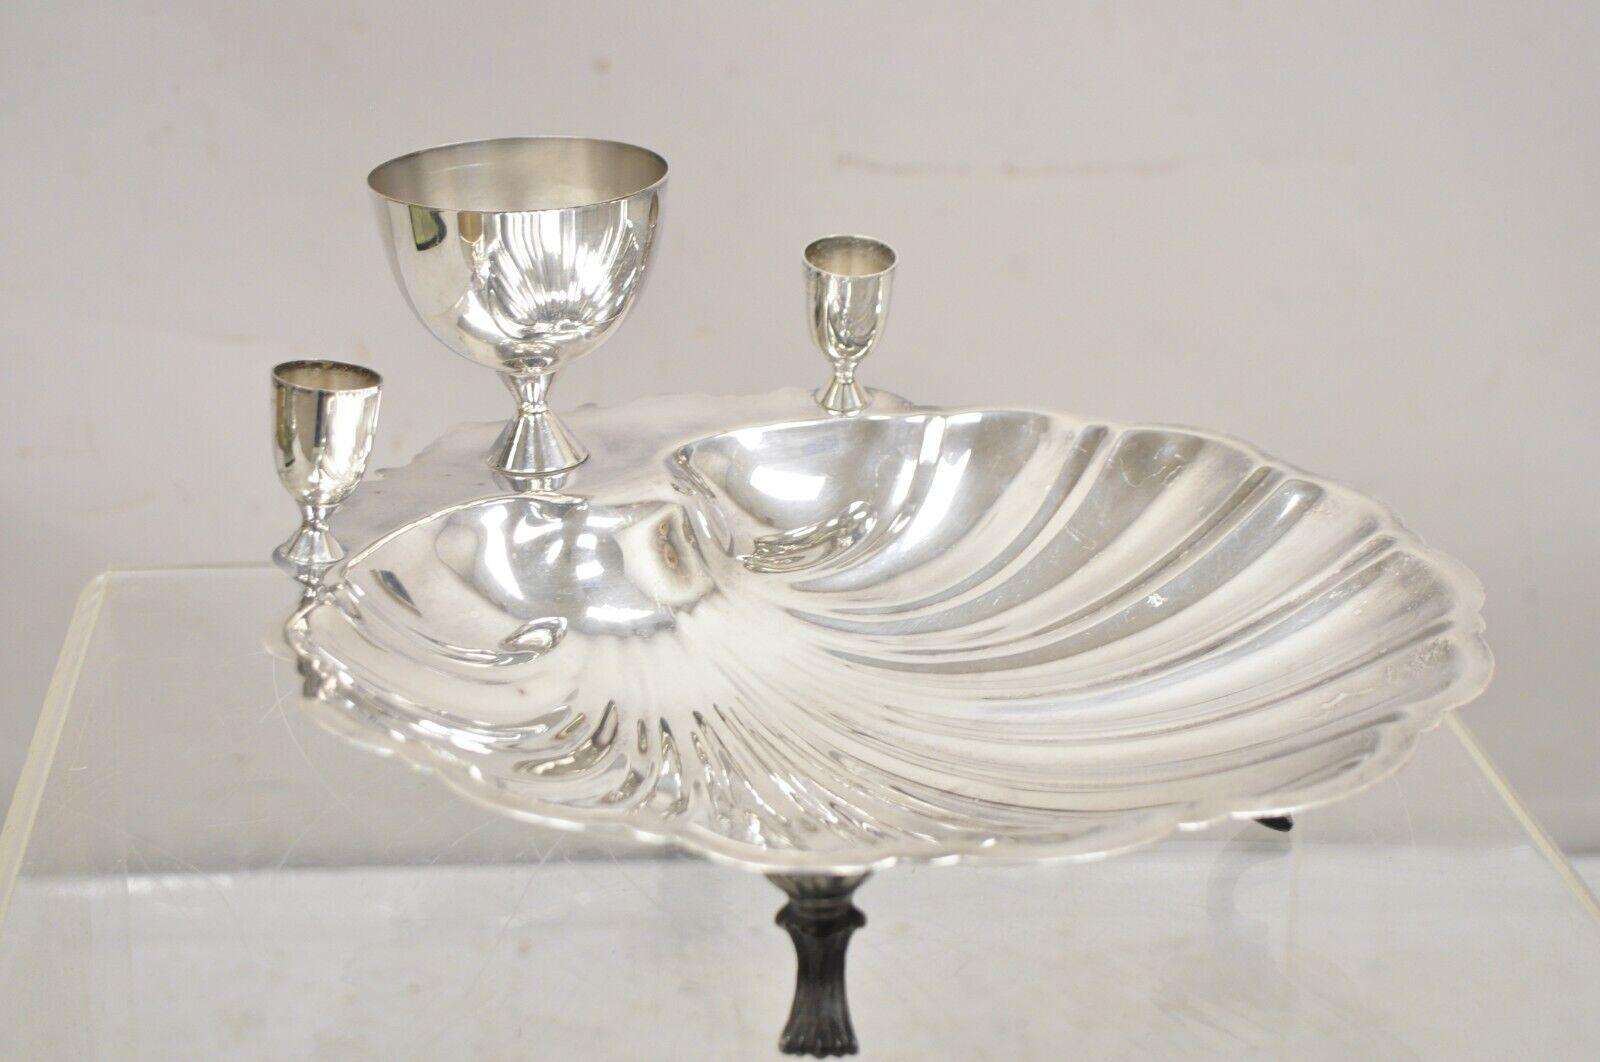 Vintage FB Rogers Silver Plated Clam Shell Seafood Bowl Platter Server. Circa Mid to Late 20th Century. Measurements:  6